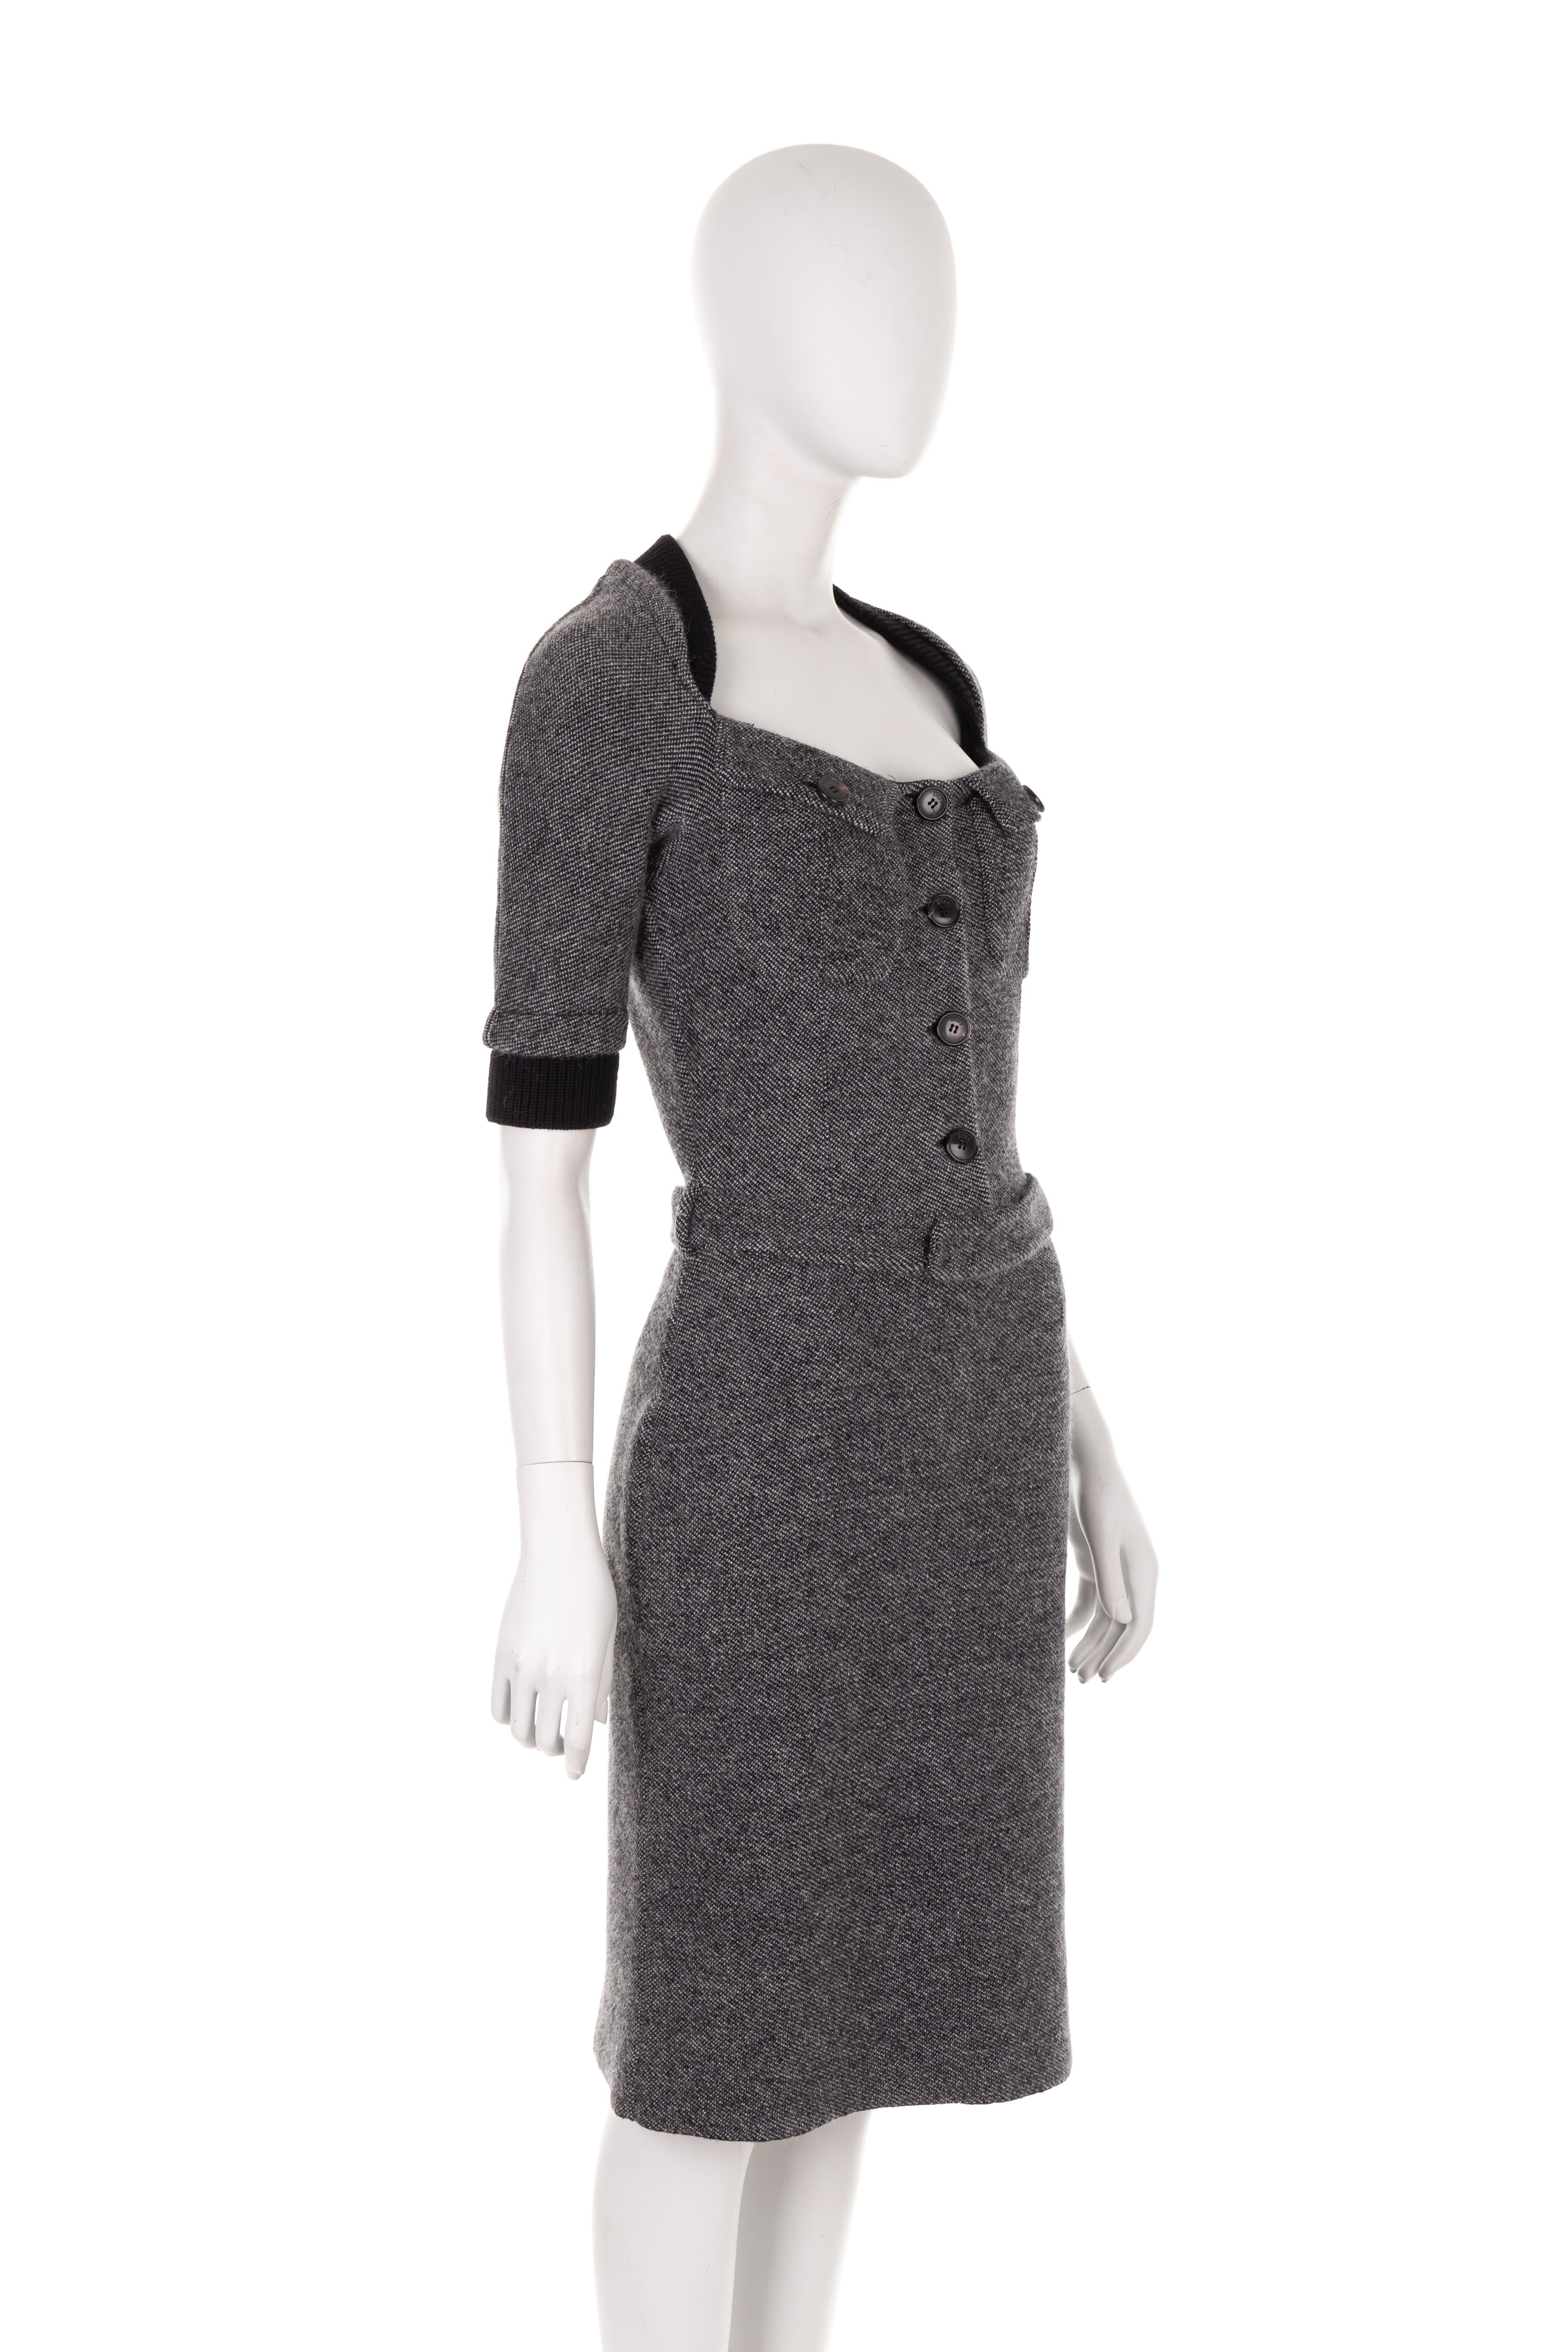 - Christian Dior by John Galliano
- Sold by Gold Palms Vintage
- Fall Winter 2010 collection
- Grey wool-cashmere tweed midi dress
- Black wool ribbed knit collar and cuffs
- 3/4 sleeves
- Buttoned-up chest
- Two front buttoned chest pockets
- Mini